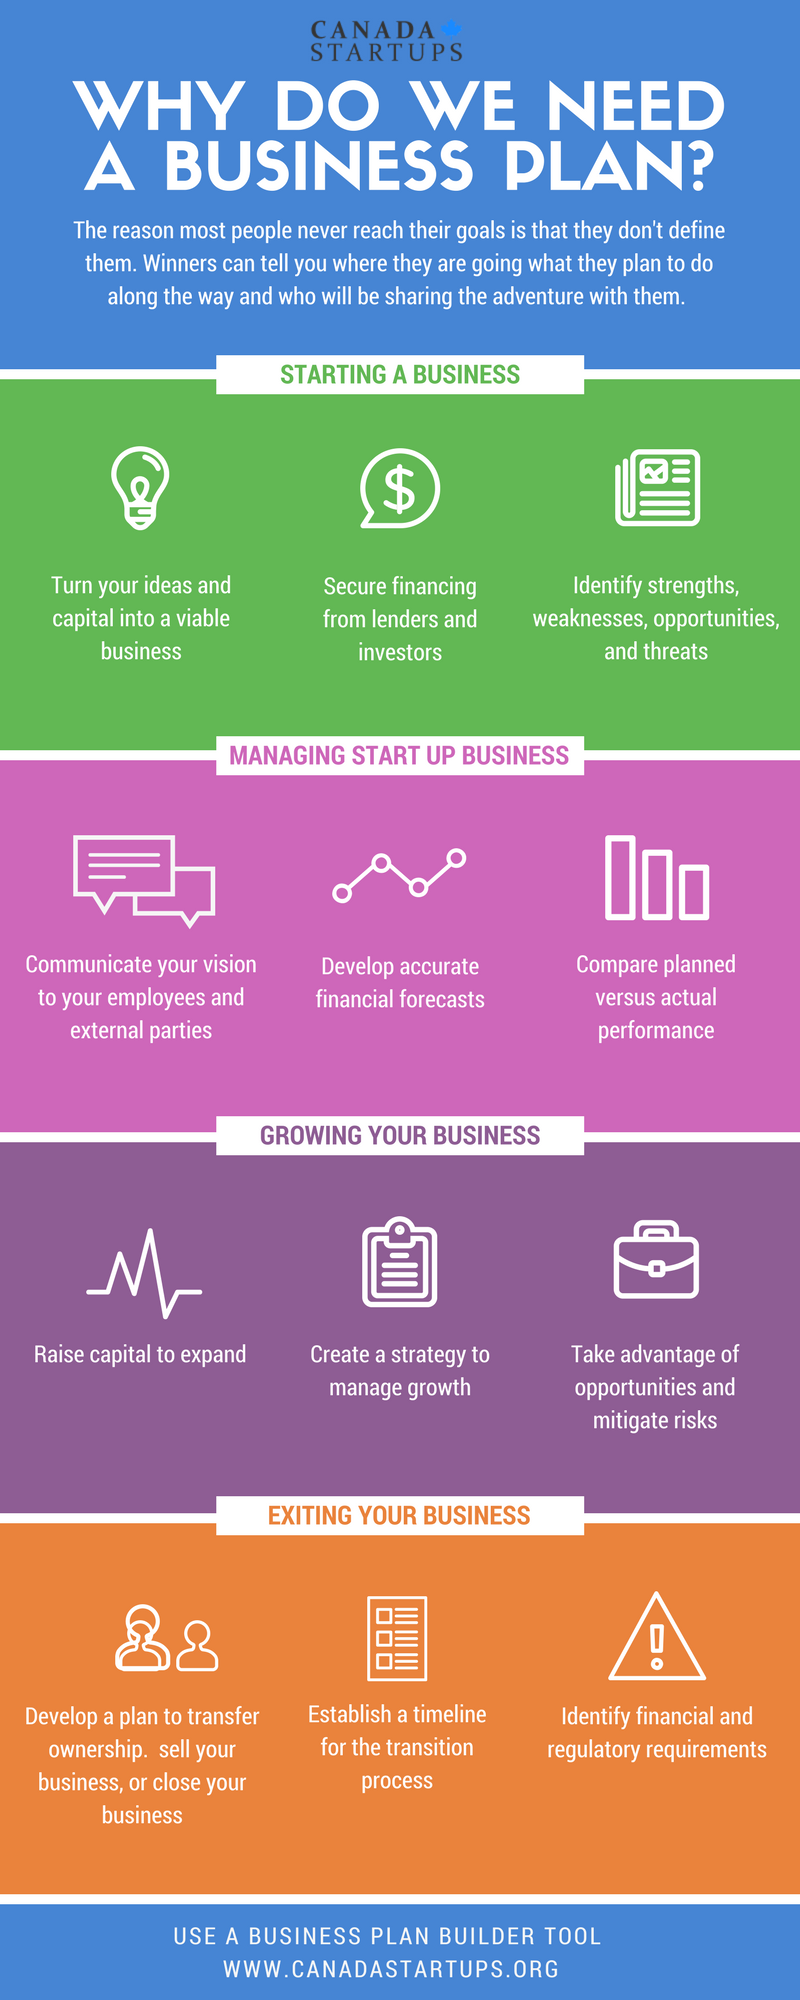 do all businesses need a business plan